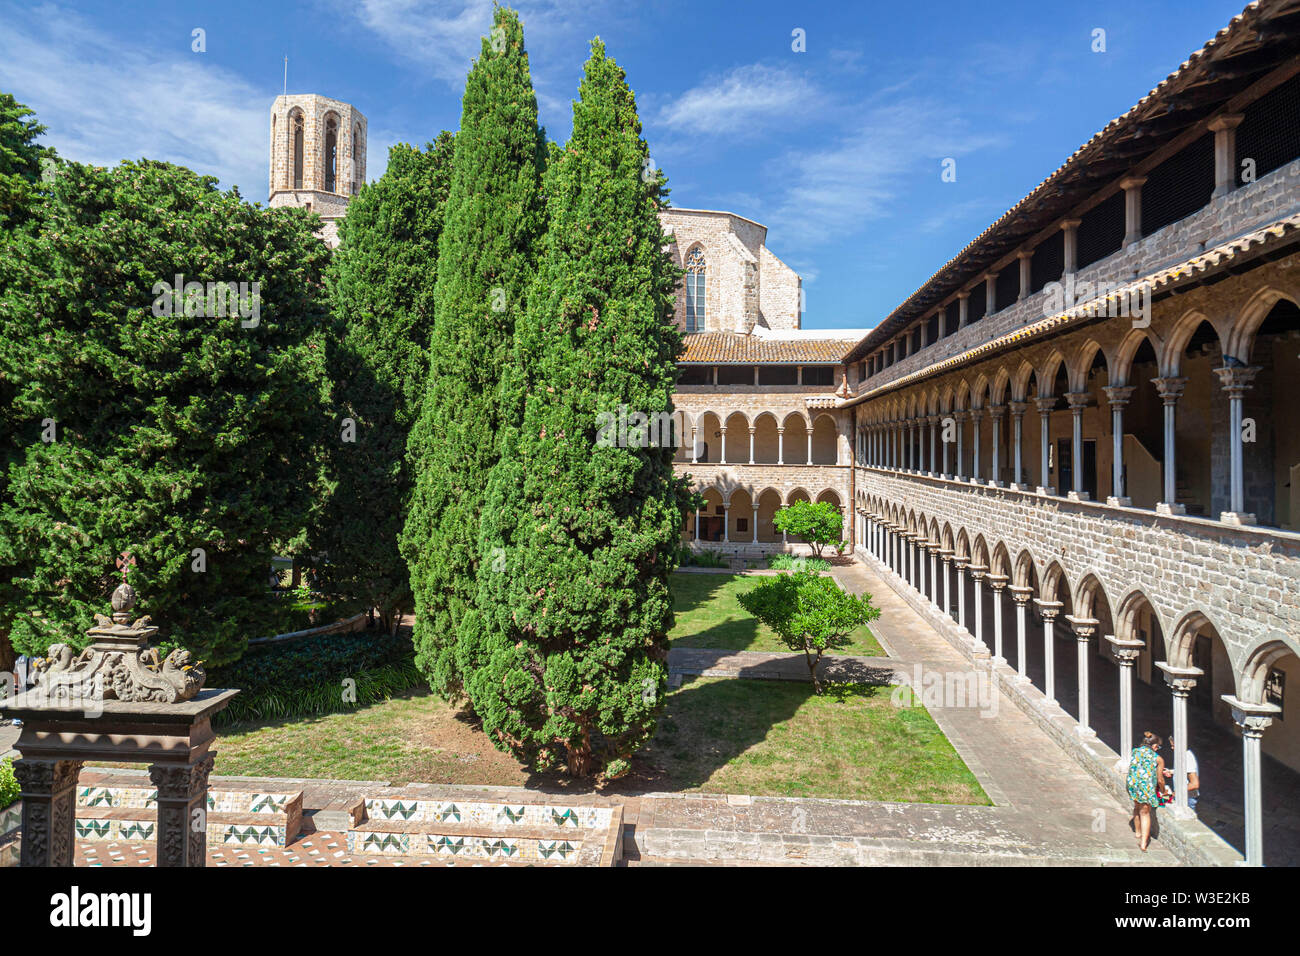 Barcelona, Spain. Cloister of Monastery of Pedralbes. Stock Photo